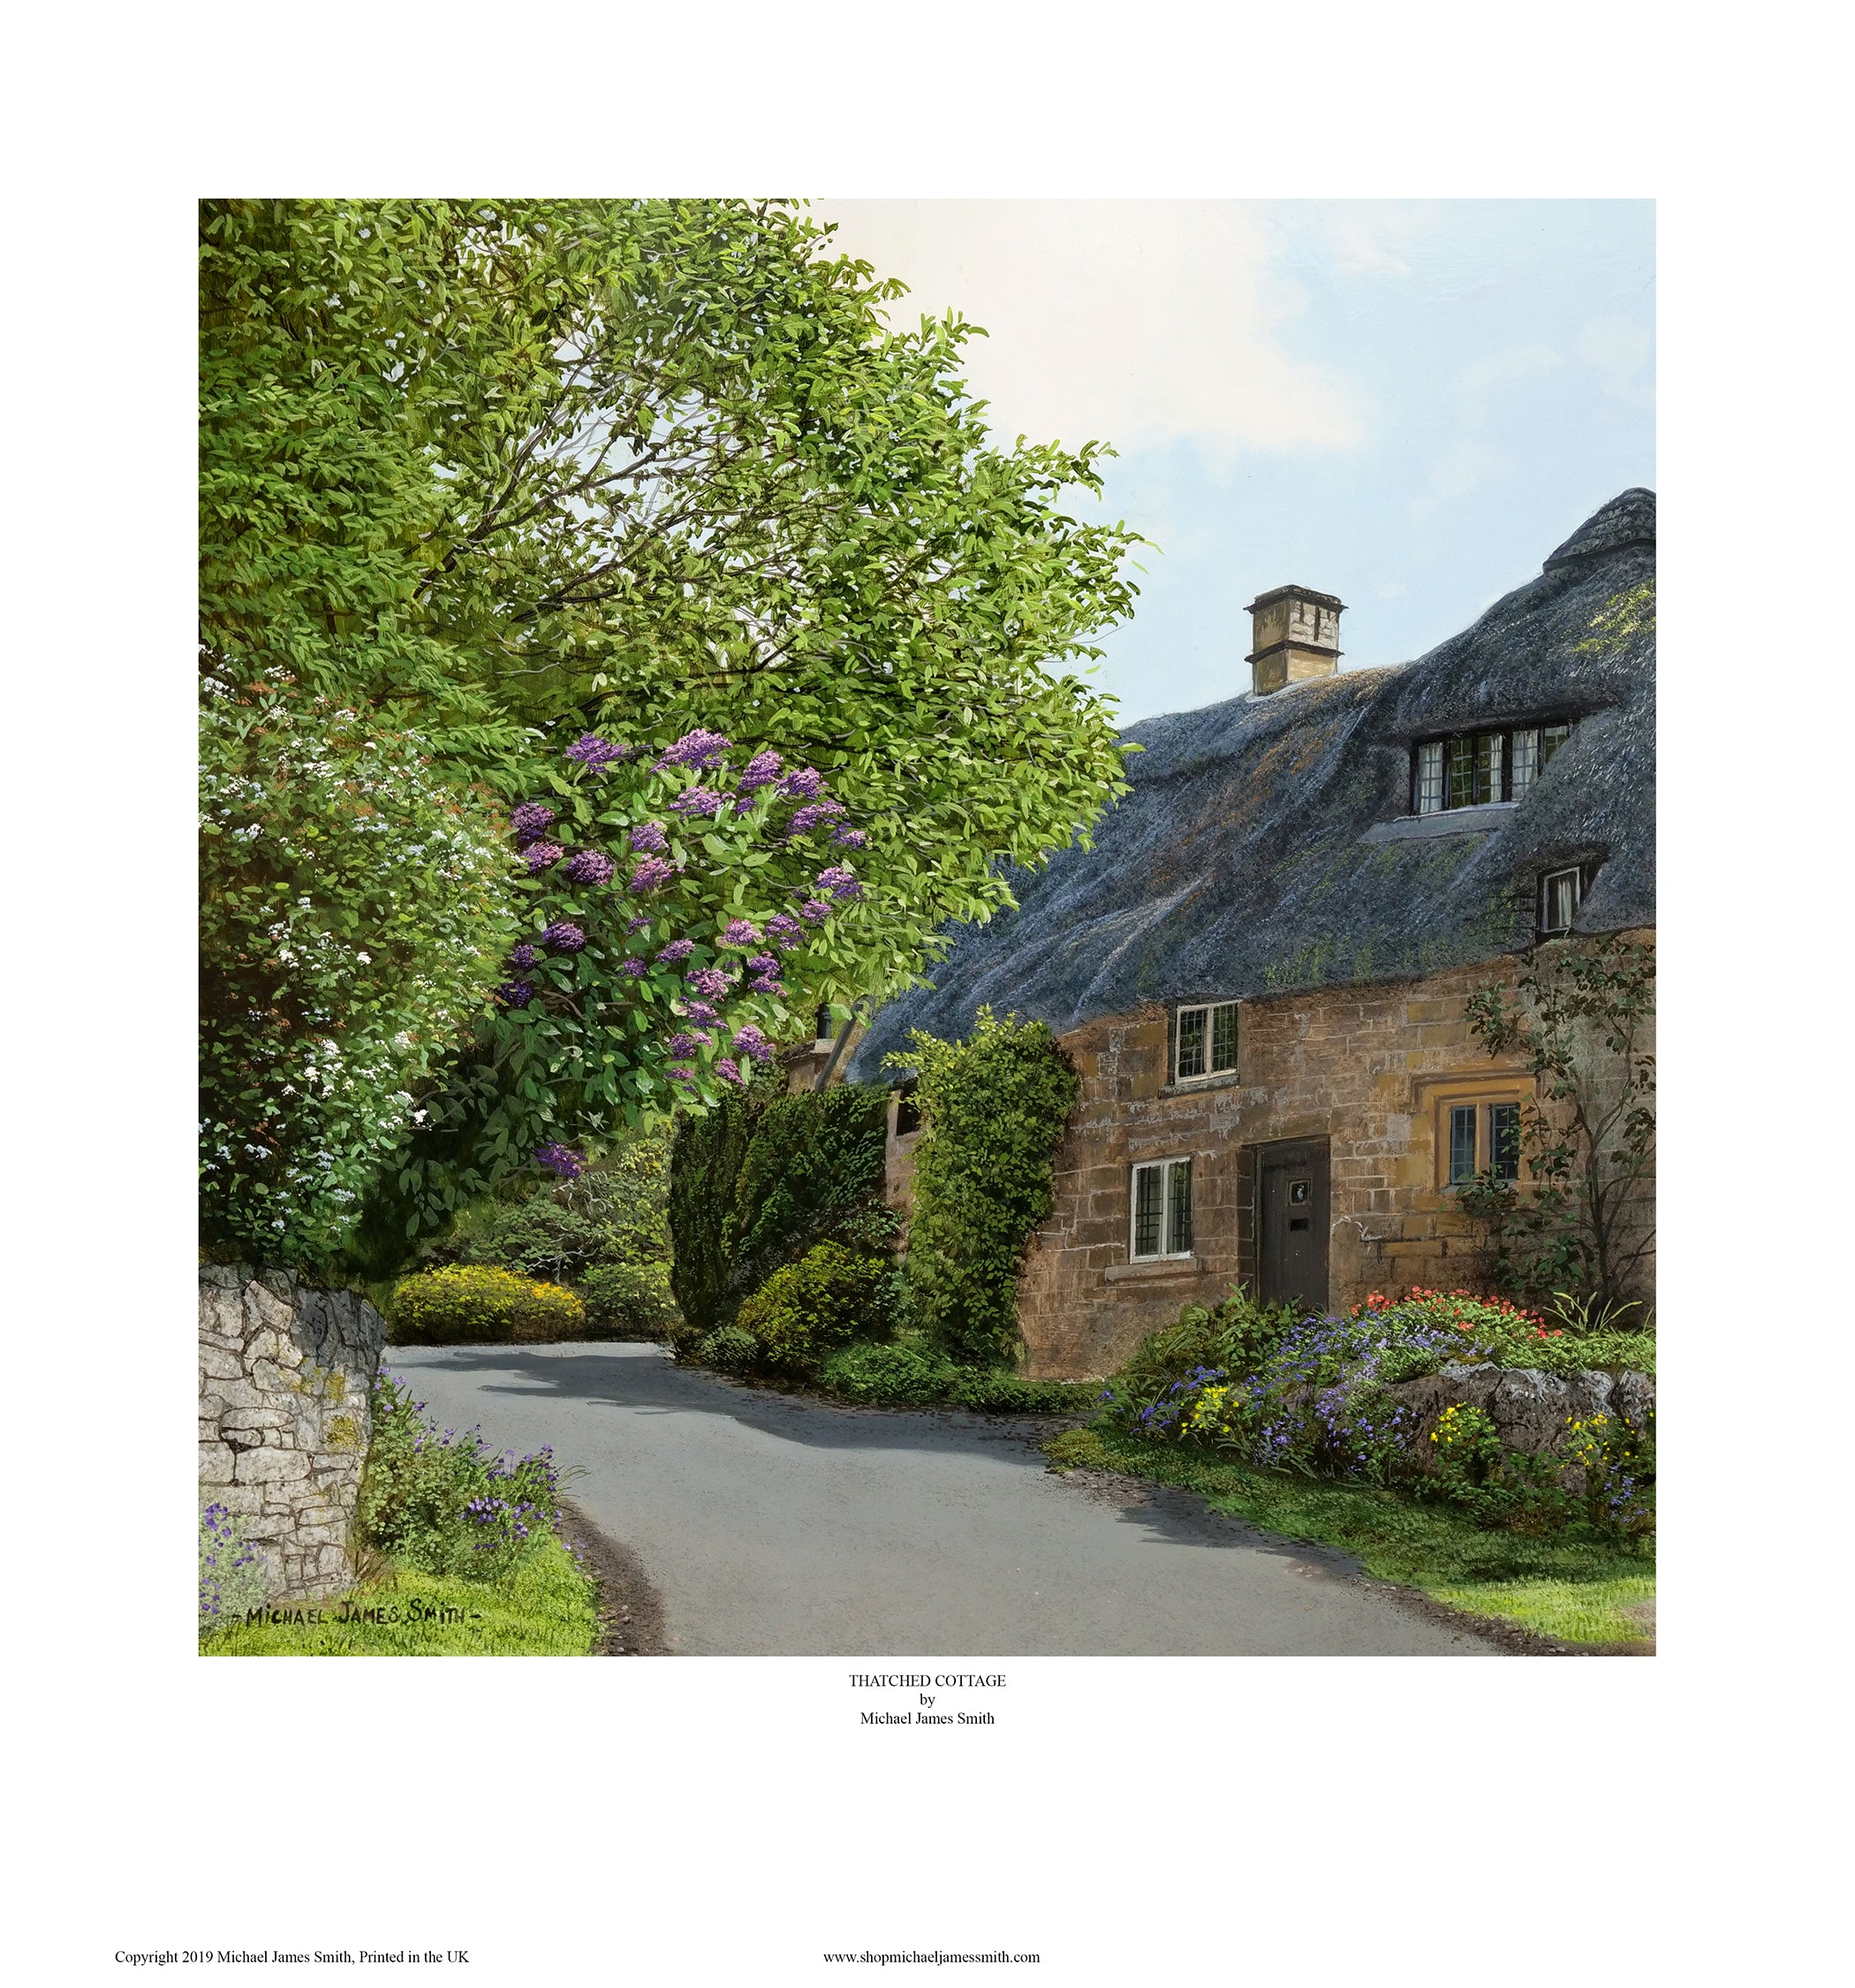 "THATCHED COTTAGE" Open edition print